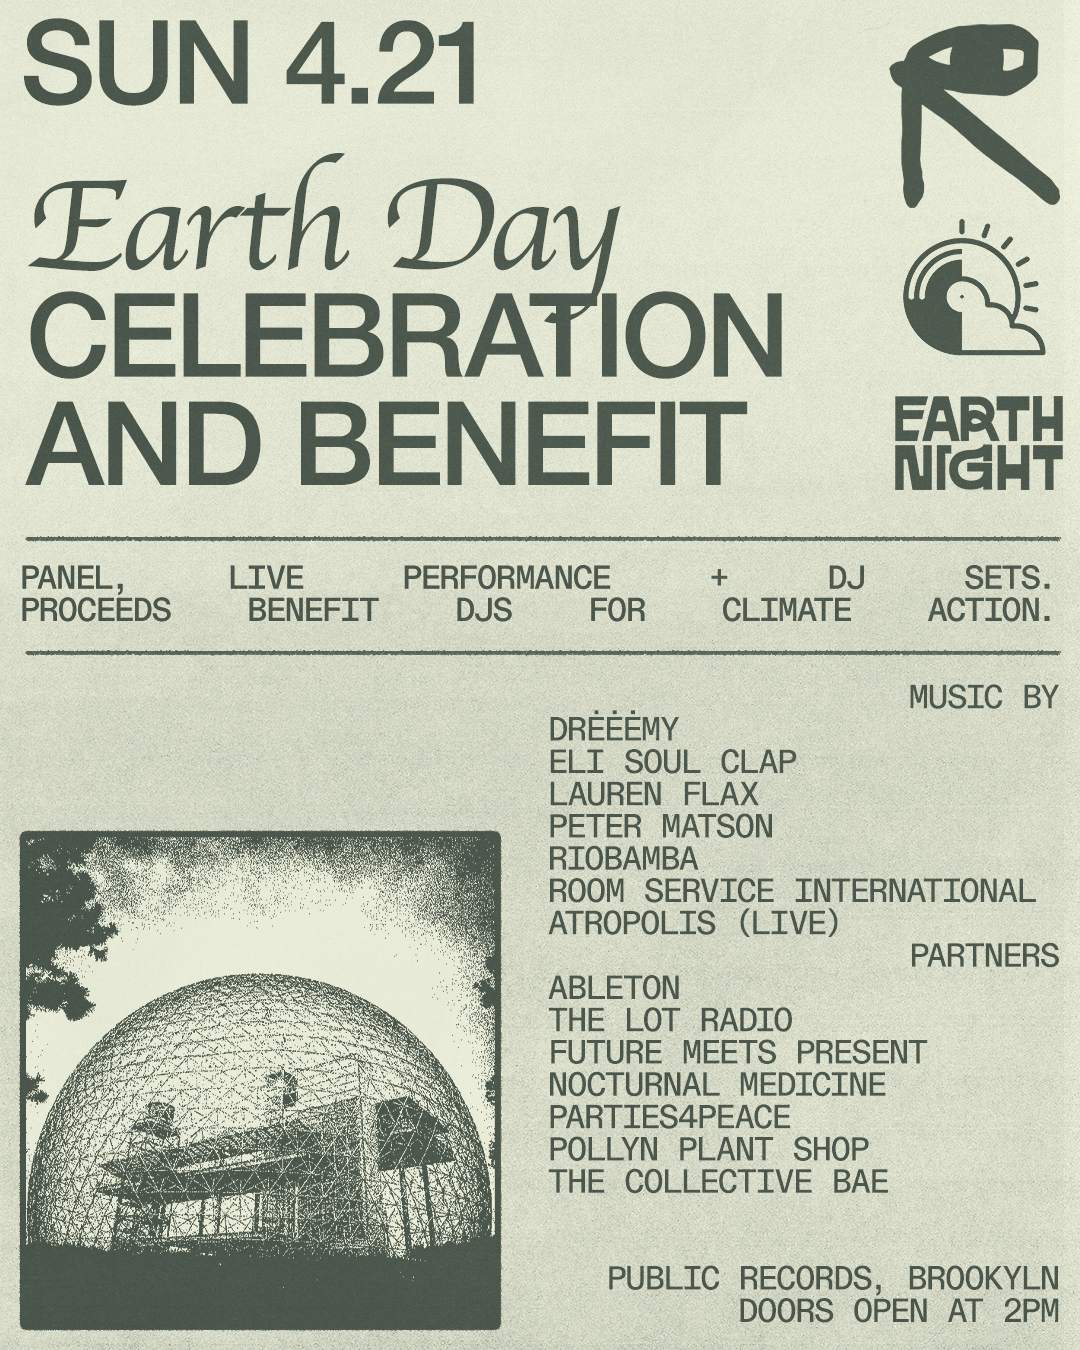 Earth Day Celebration and Benefit feat. Eli Soul Clap + Lauren Flax + Riobamba + more - Página frontal